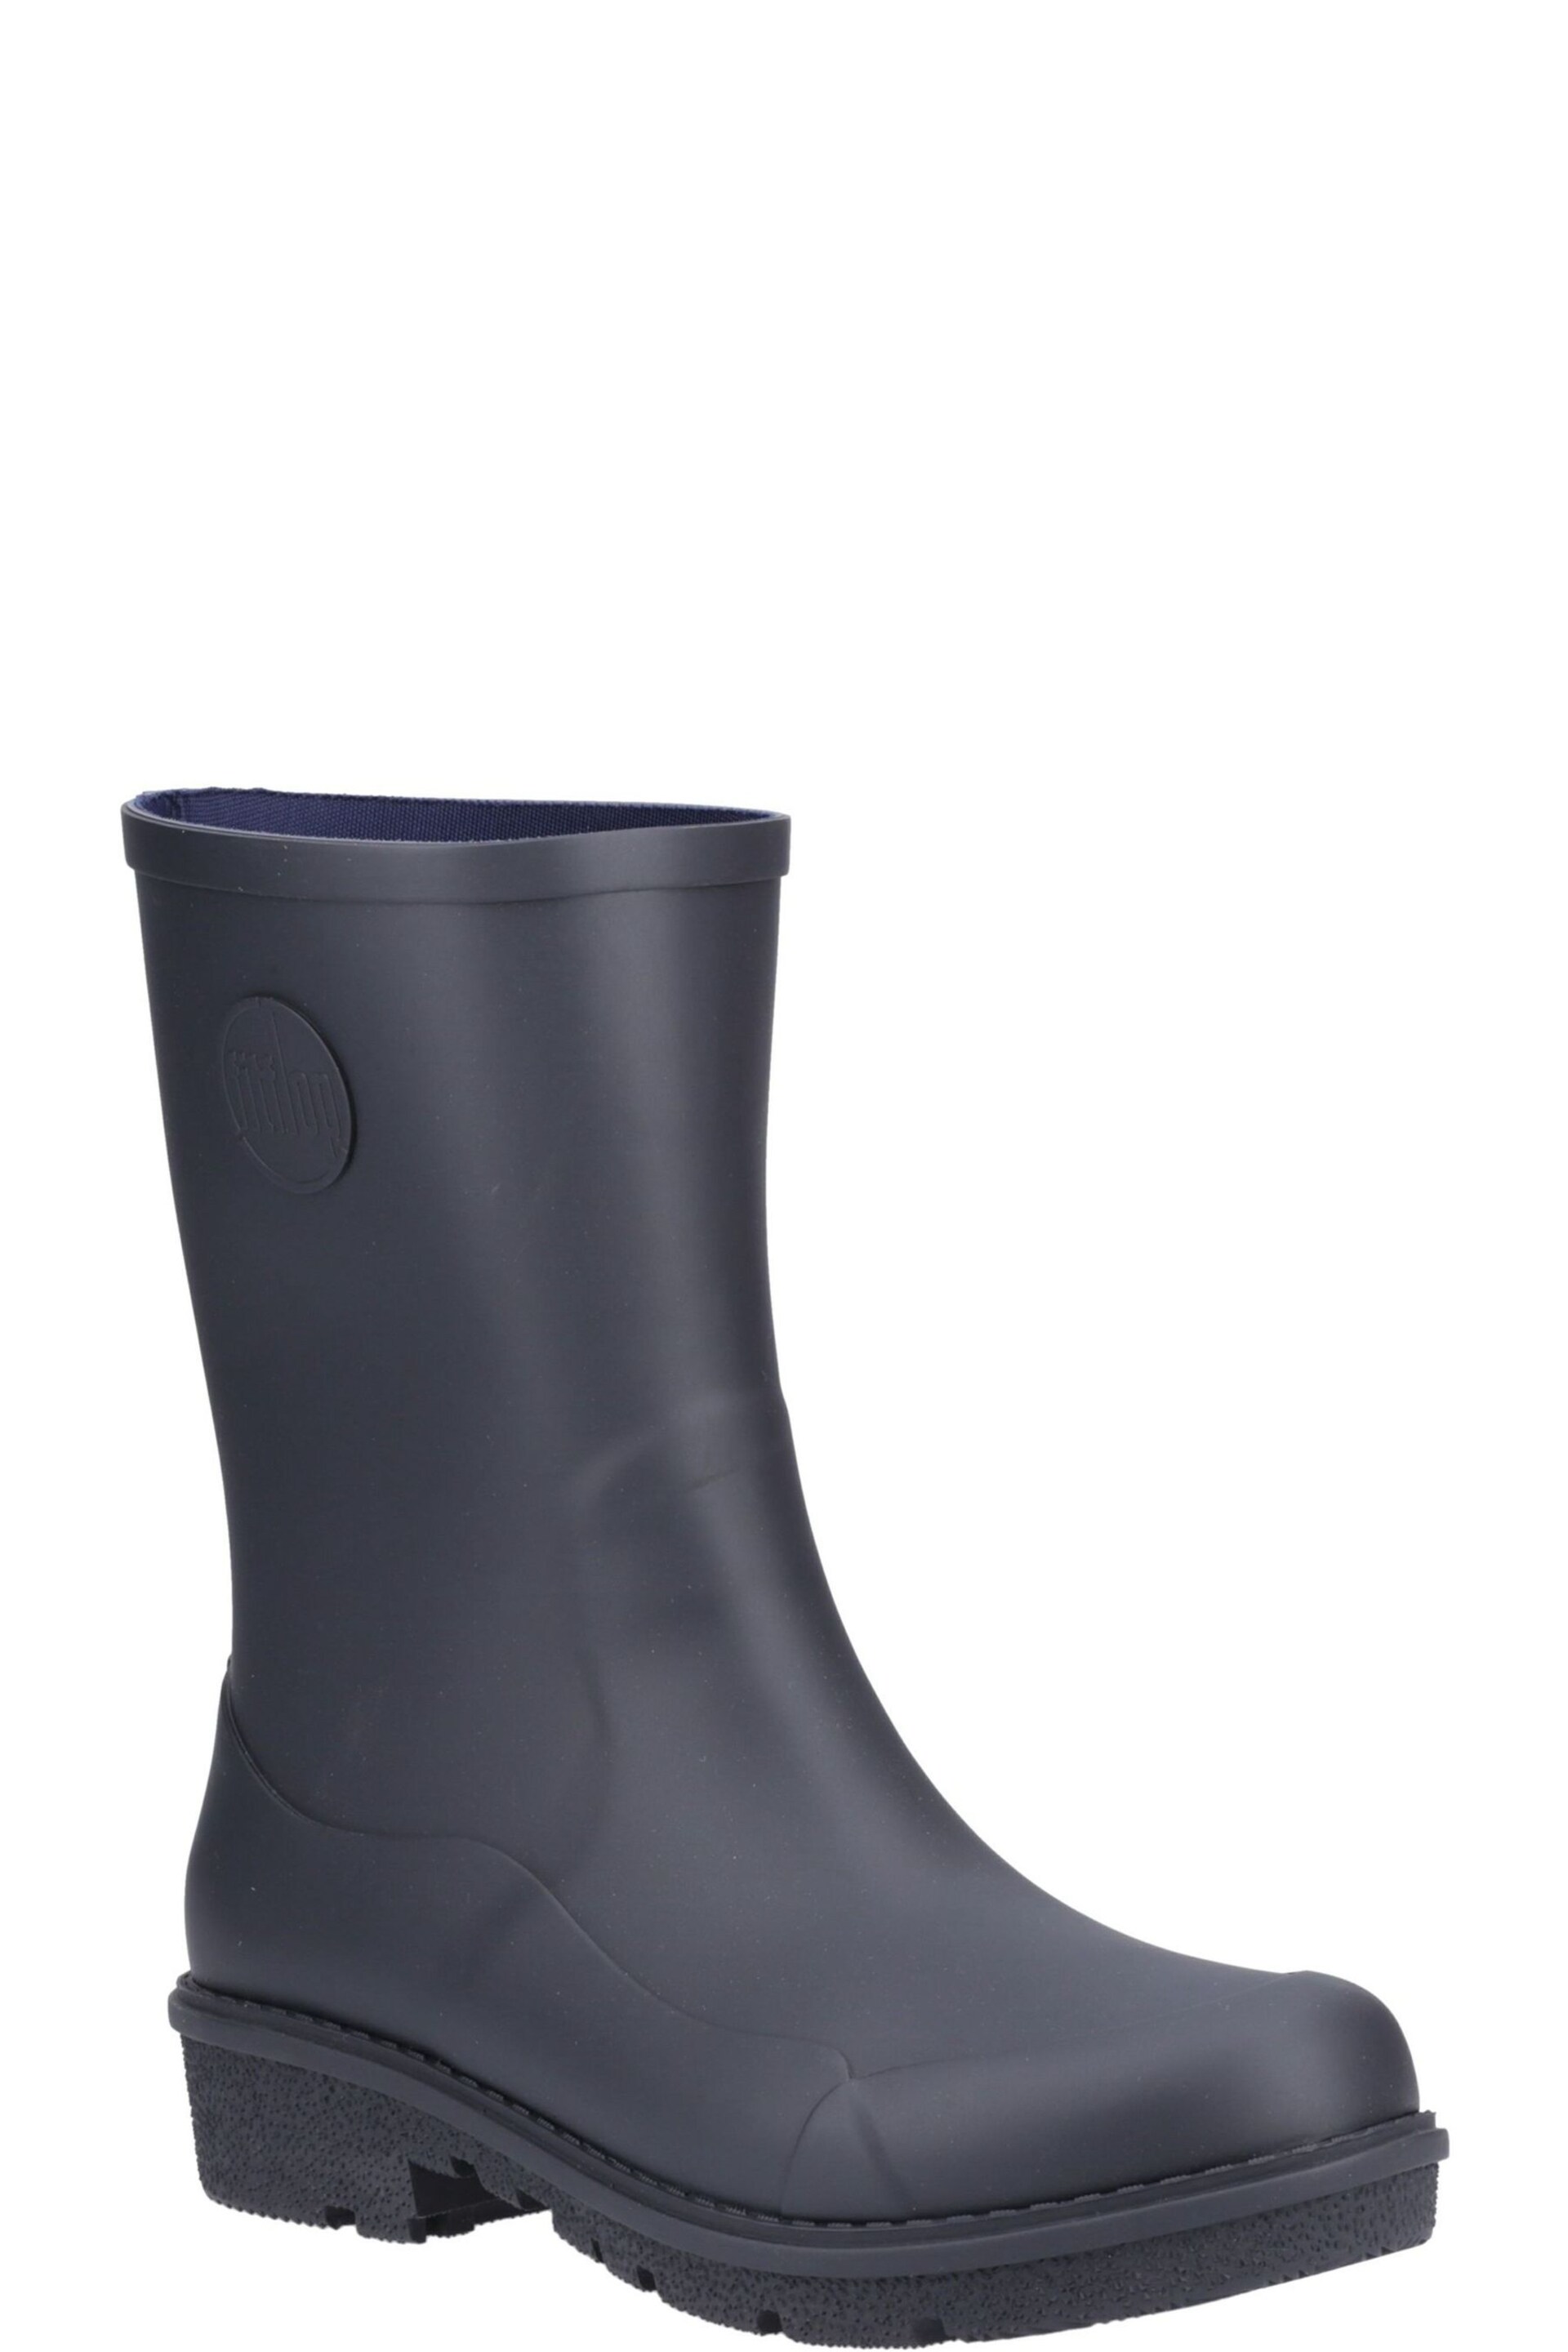 FitFlop Short Blue Wonderwelly Wellies - Image 2 of 5